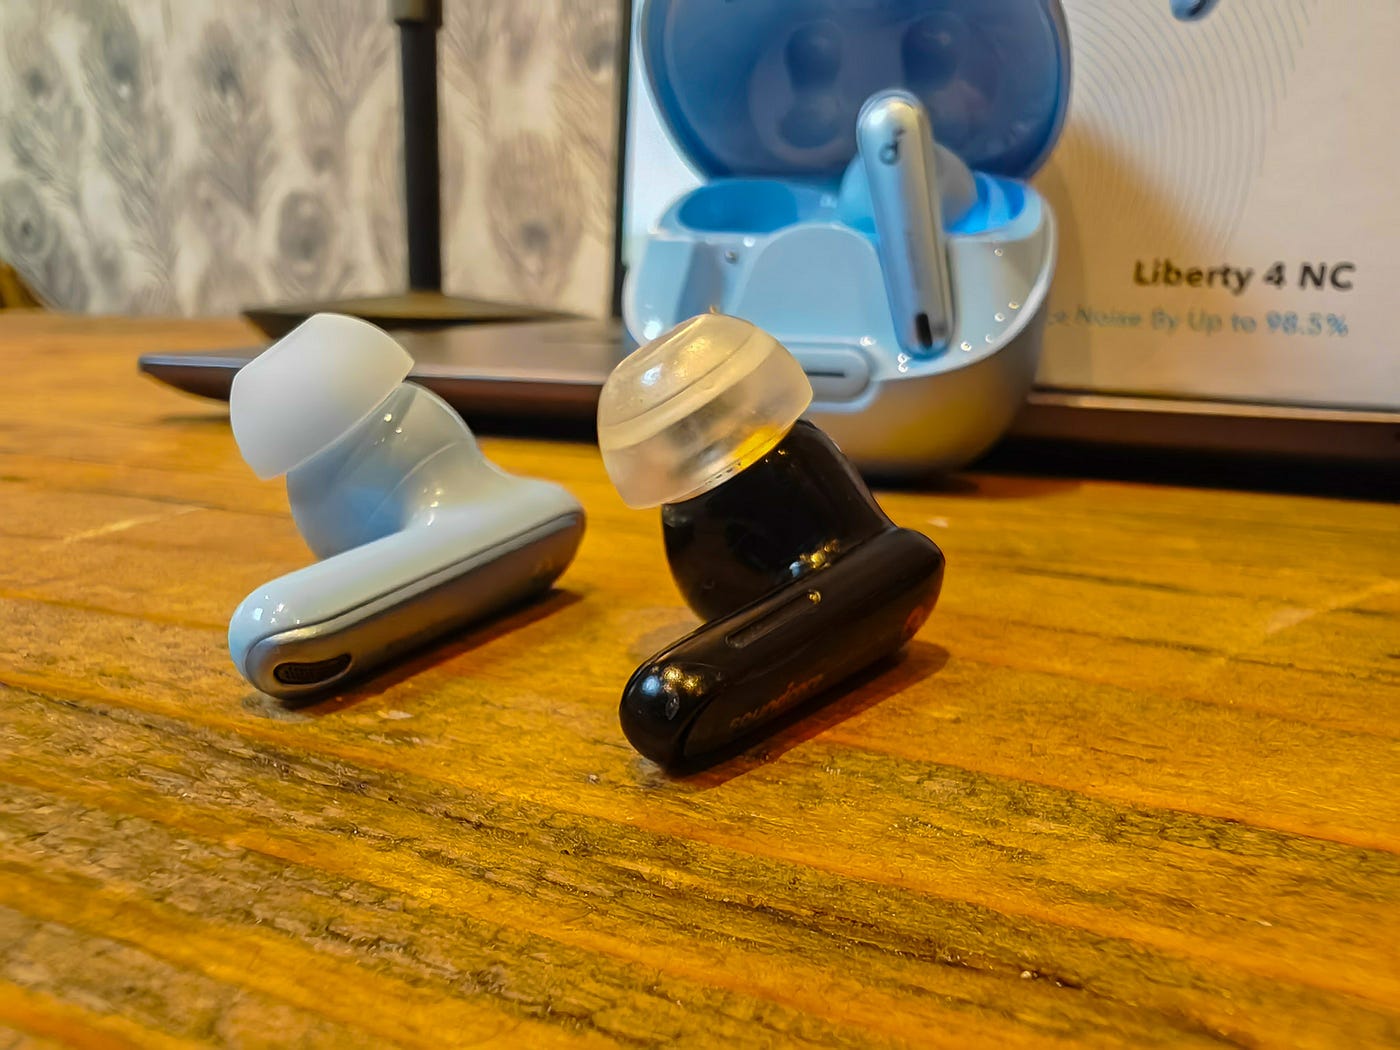 Soundcore Liberty 4 NC by Anker Review